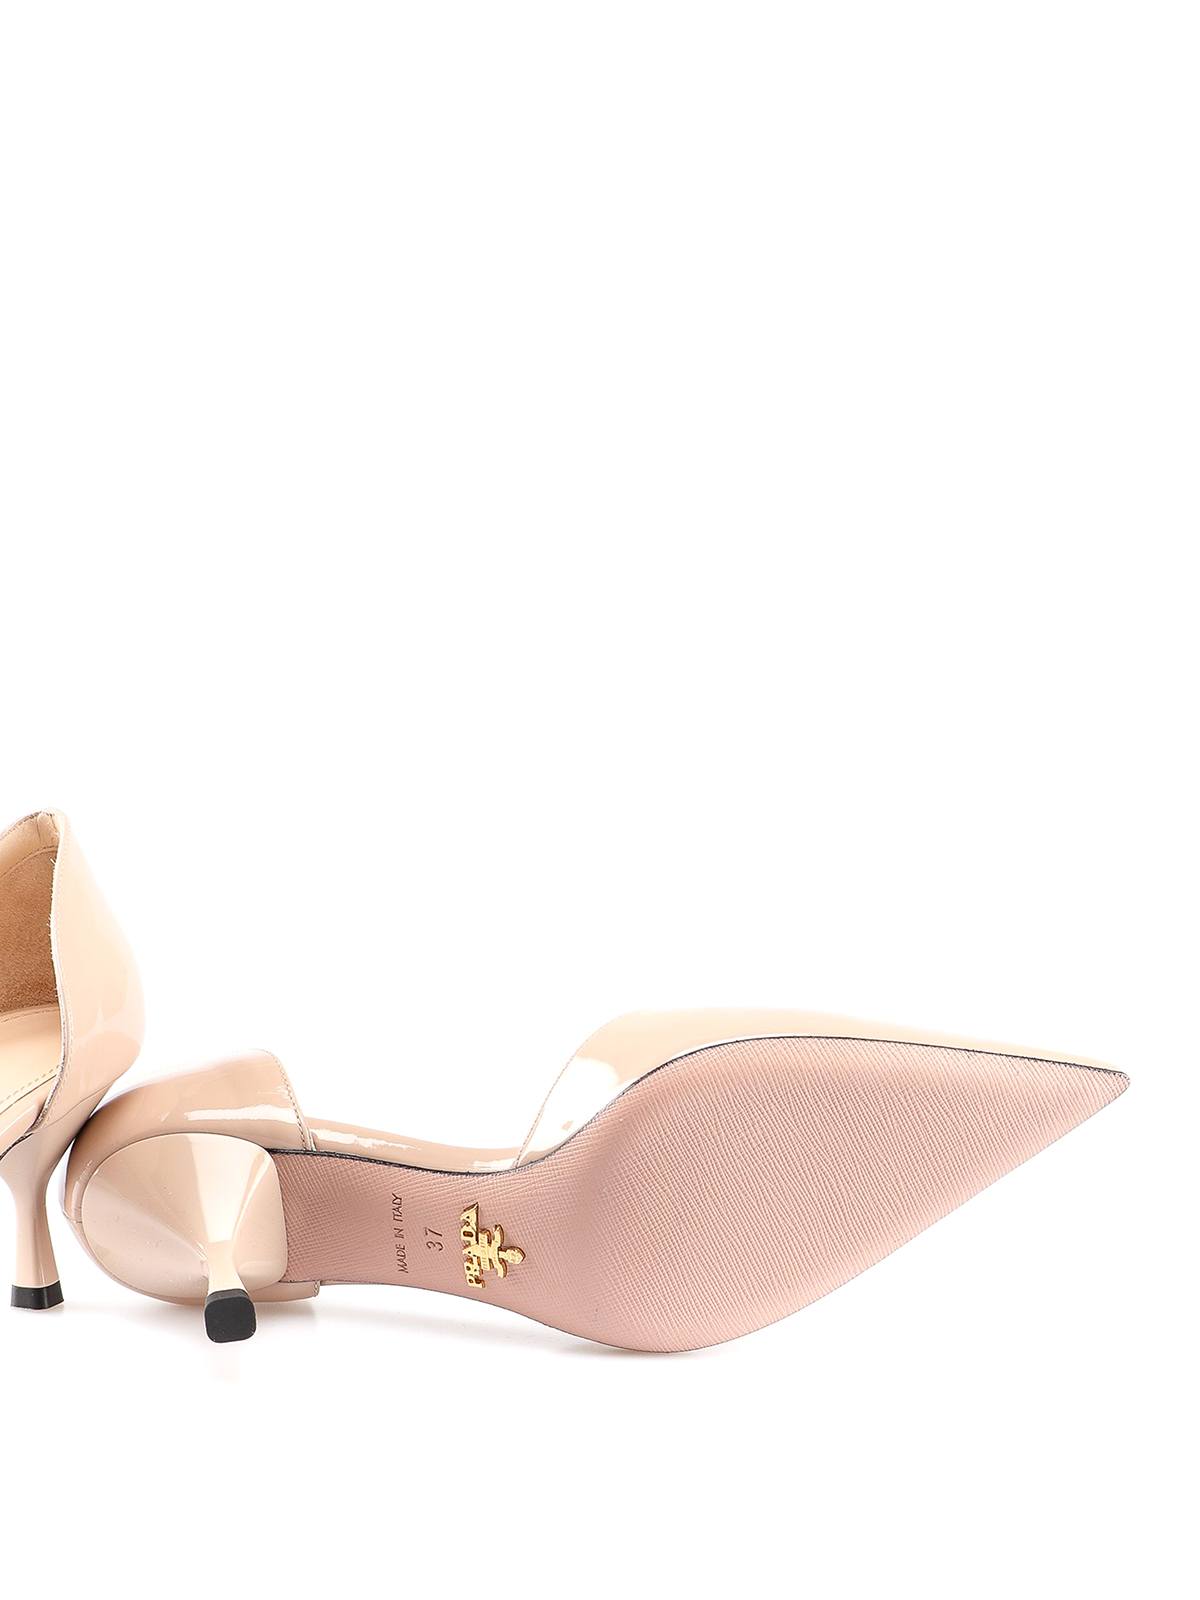 Orsay style pink patent leather pumps 